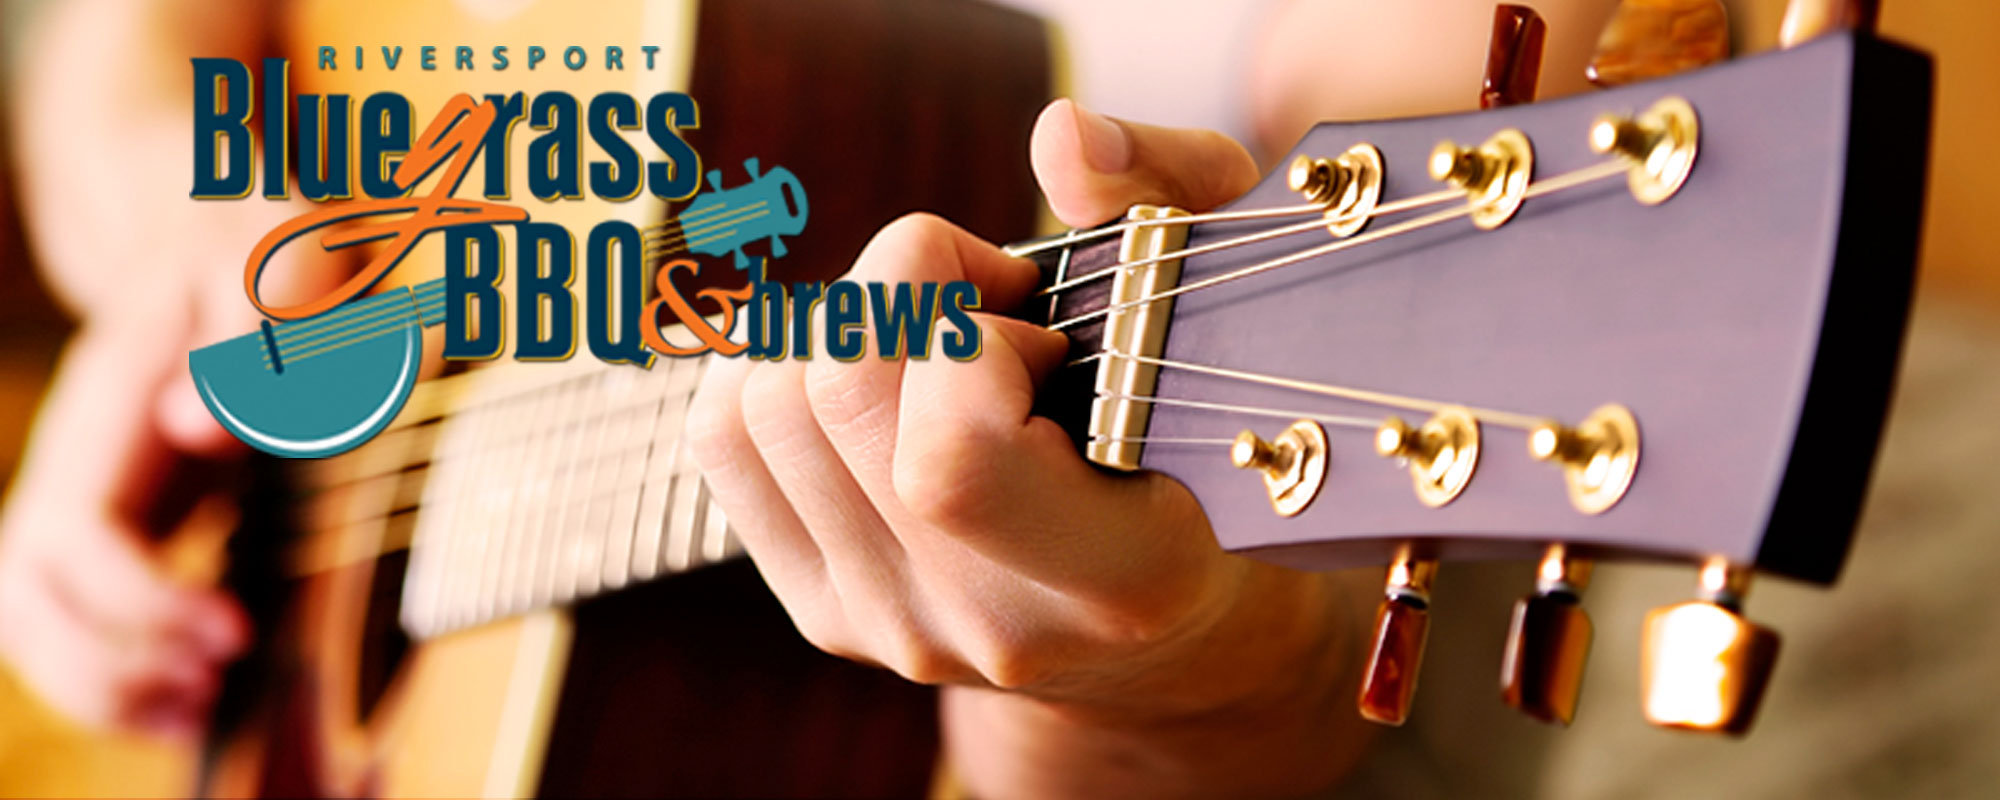 Head to RIVERSPORT for Bluegrass, BBQ & Brews on June 3